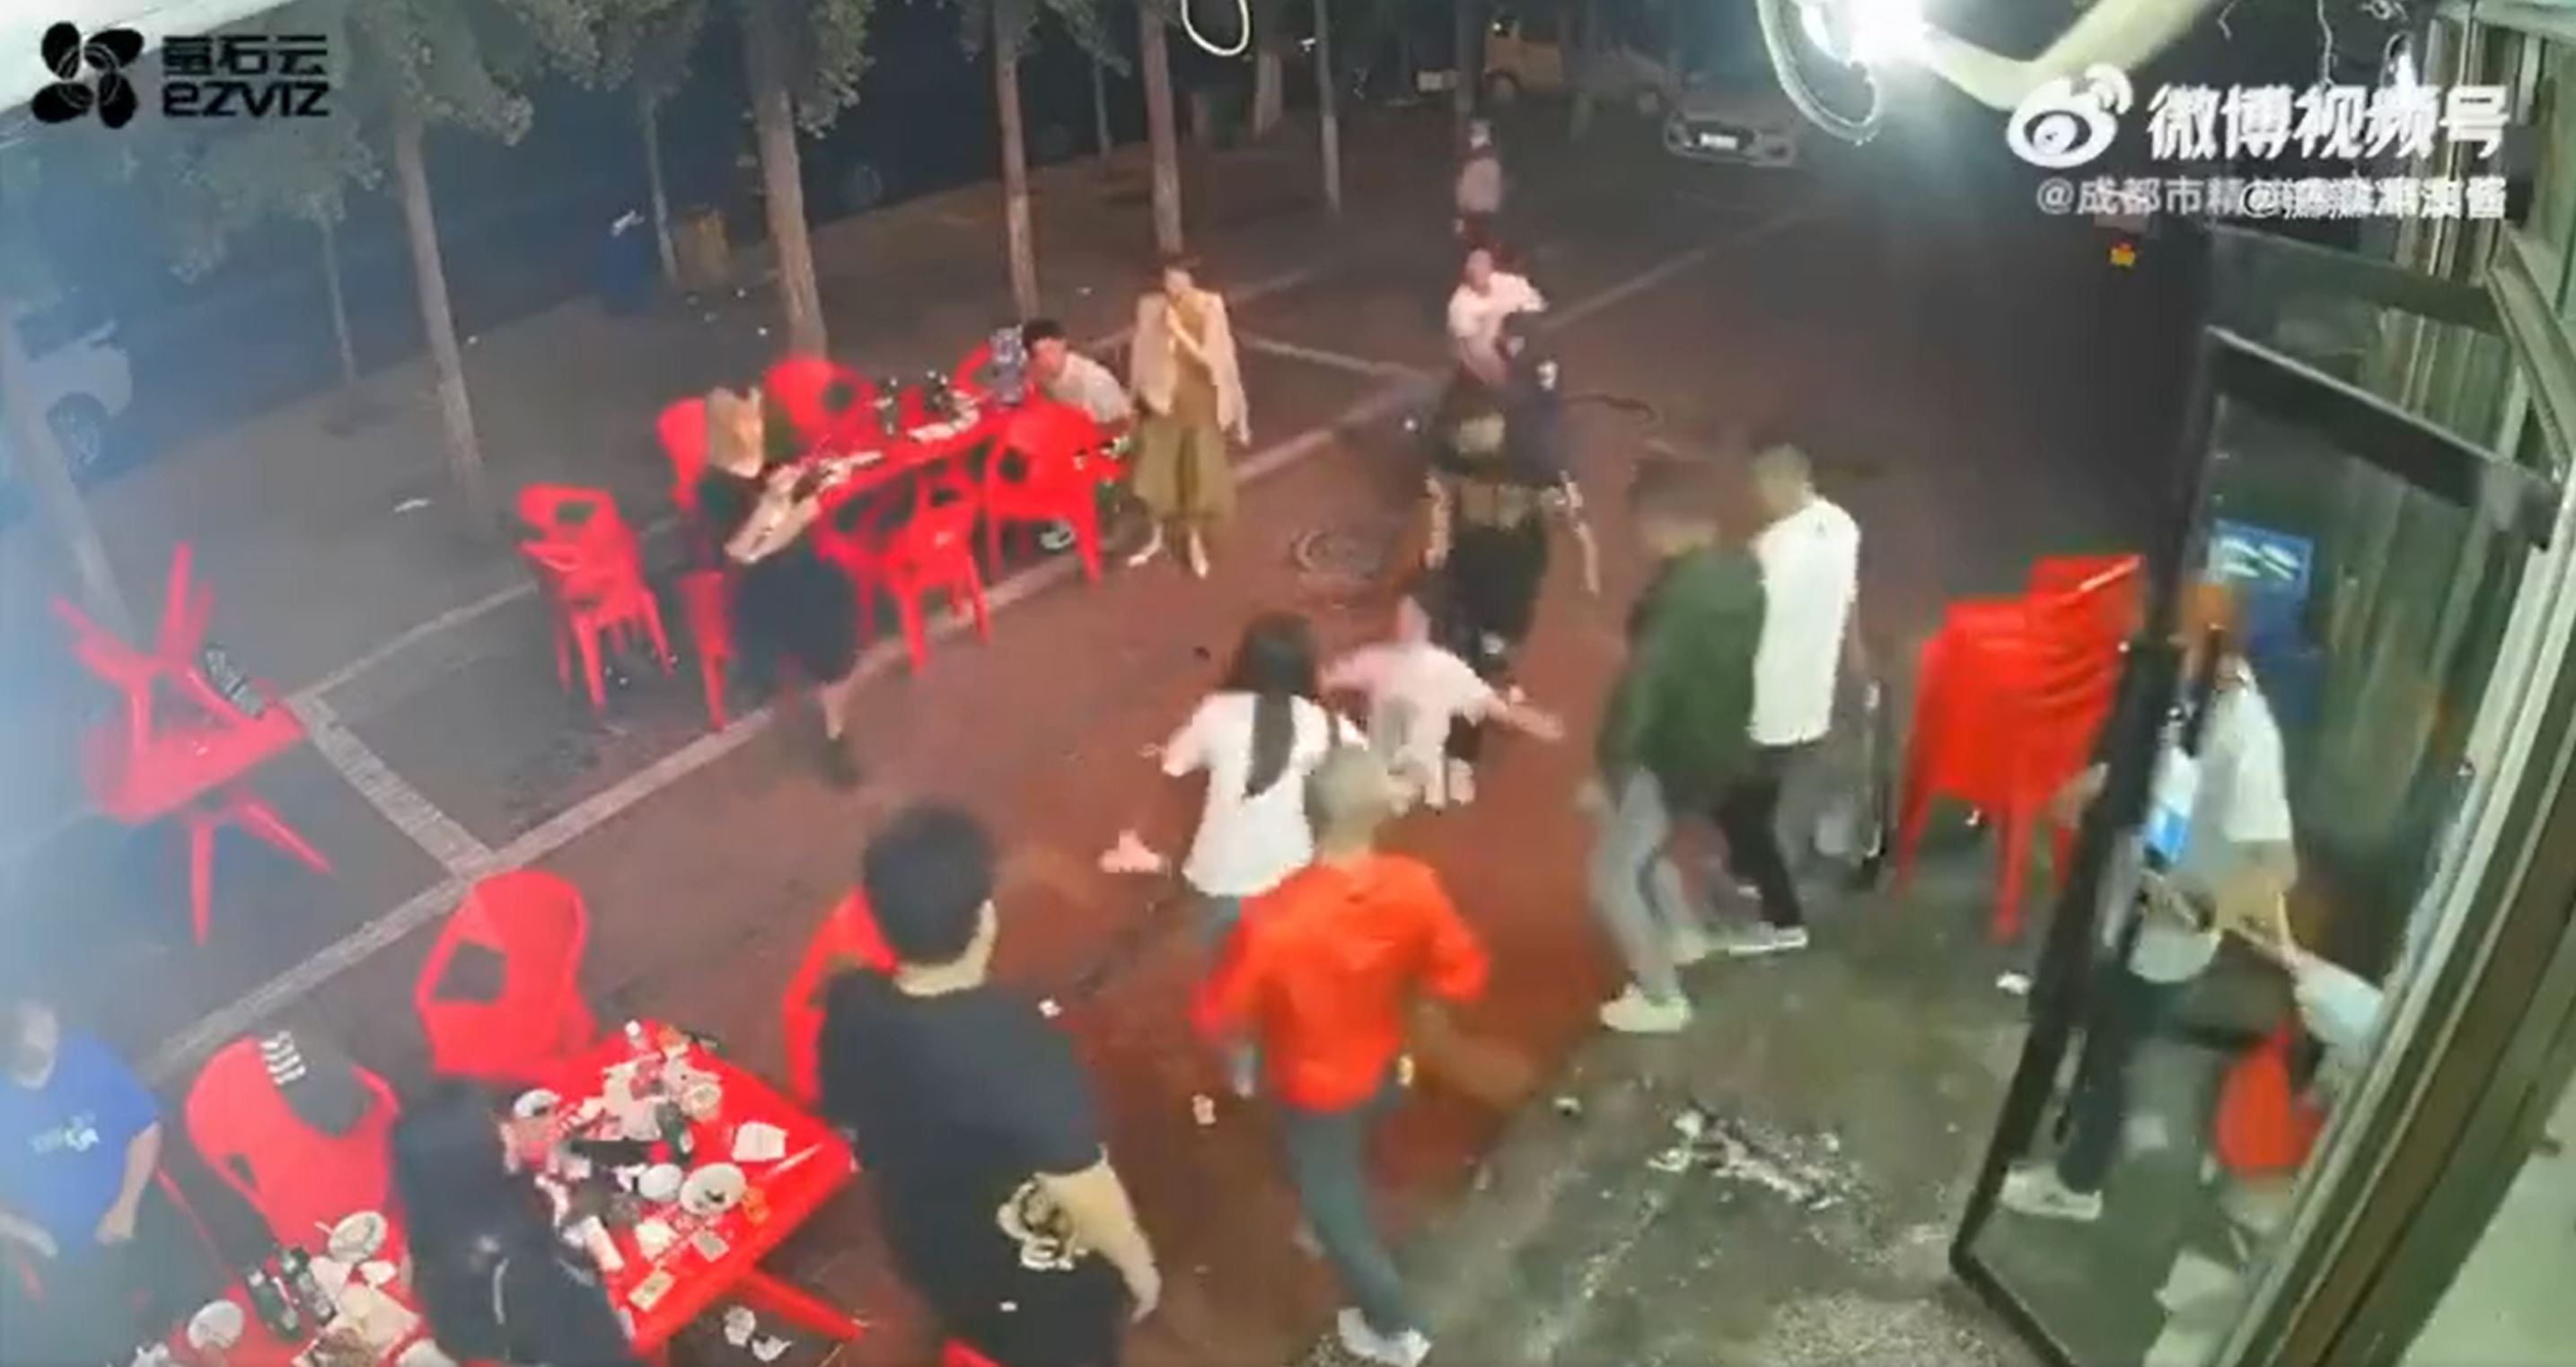 China Buffet Women Porn - China Investigates Police Over Restaurant Attack on Women That Stunned  Nation - Bloomberg